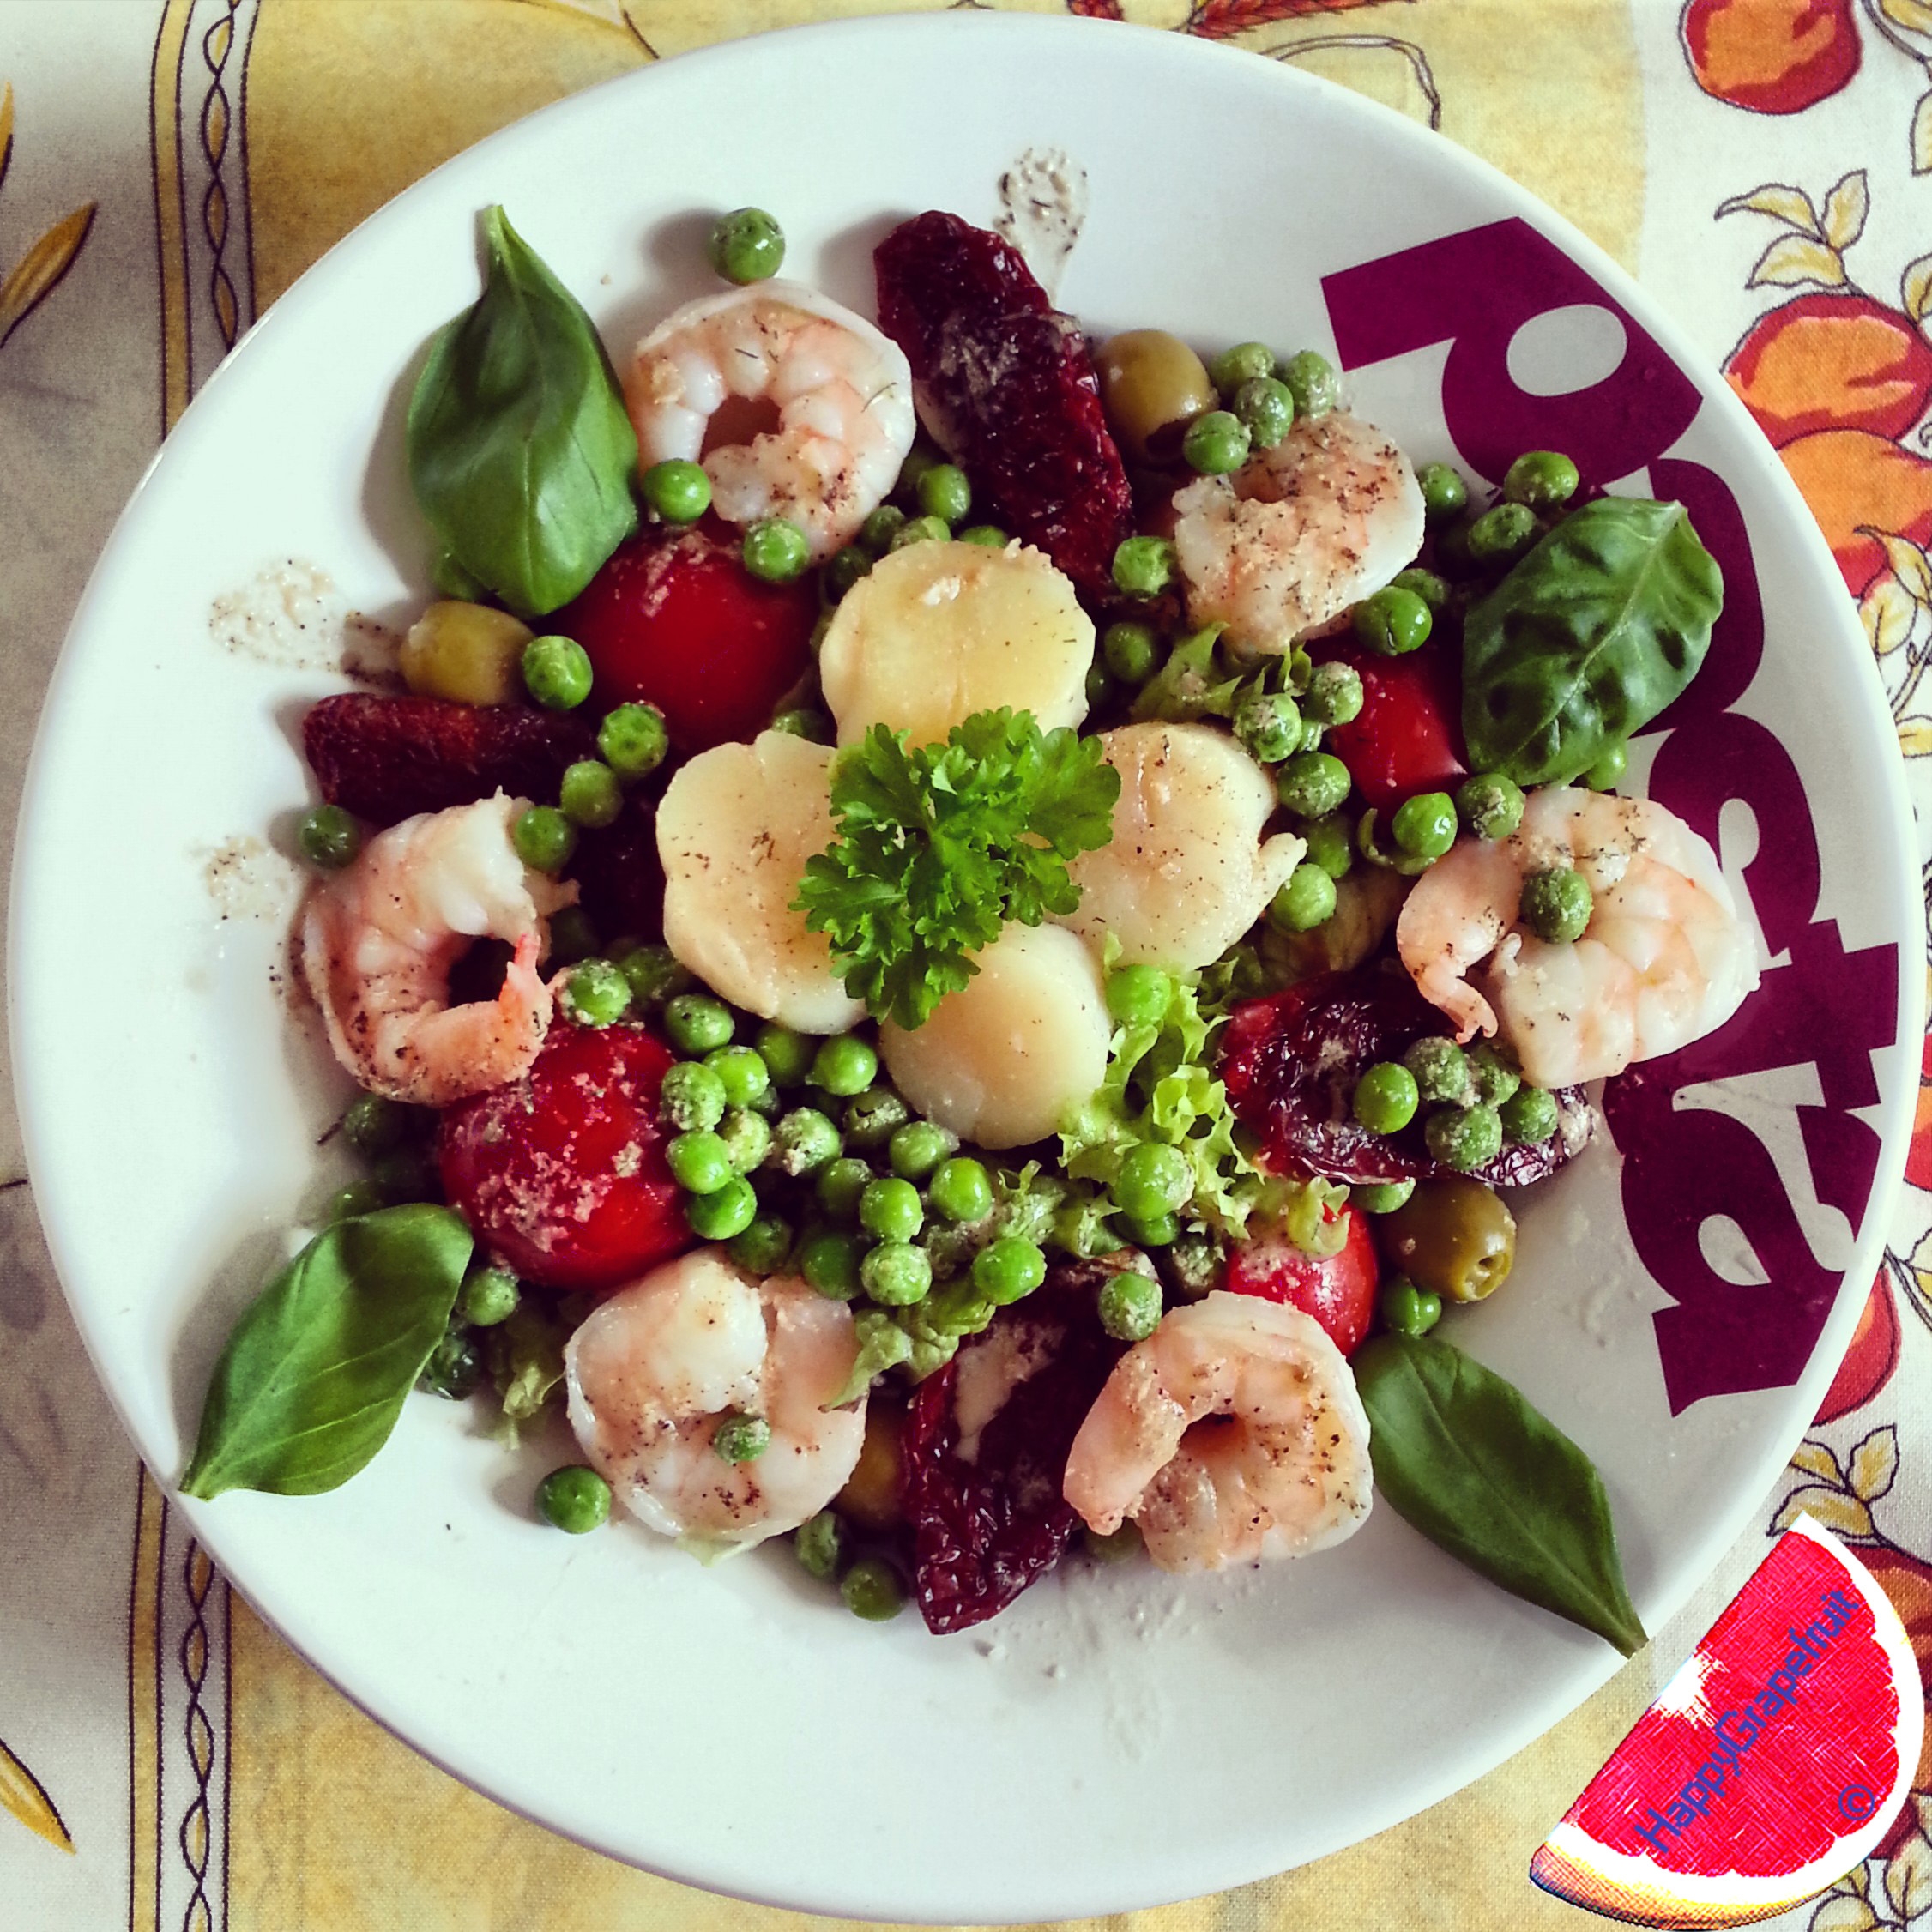 Ripped Recipes - Scallop Scampi Salad With a Tangy Pea Dressing